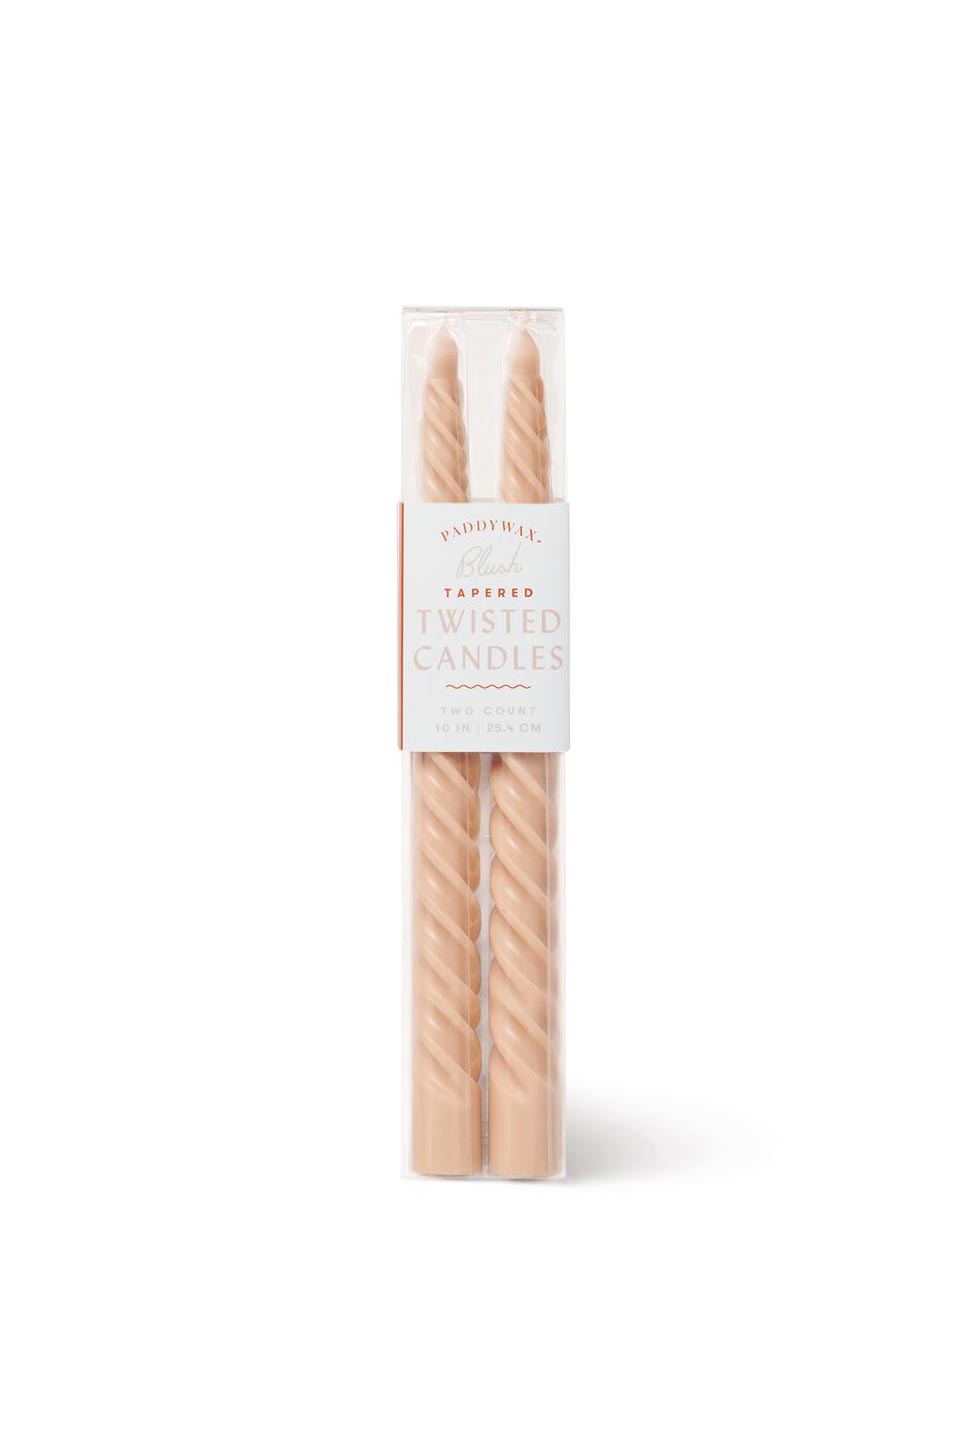 Paddywax - Twisted Taper 10" Boxed Candles - Blush